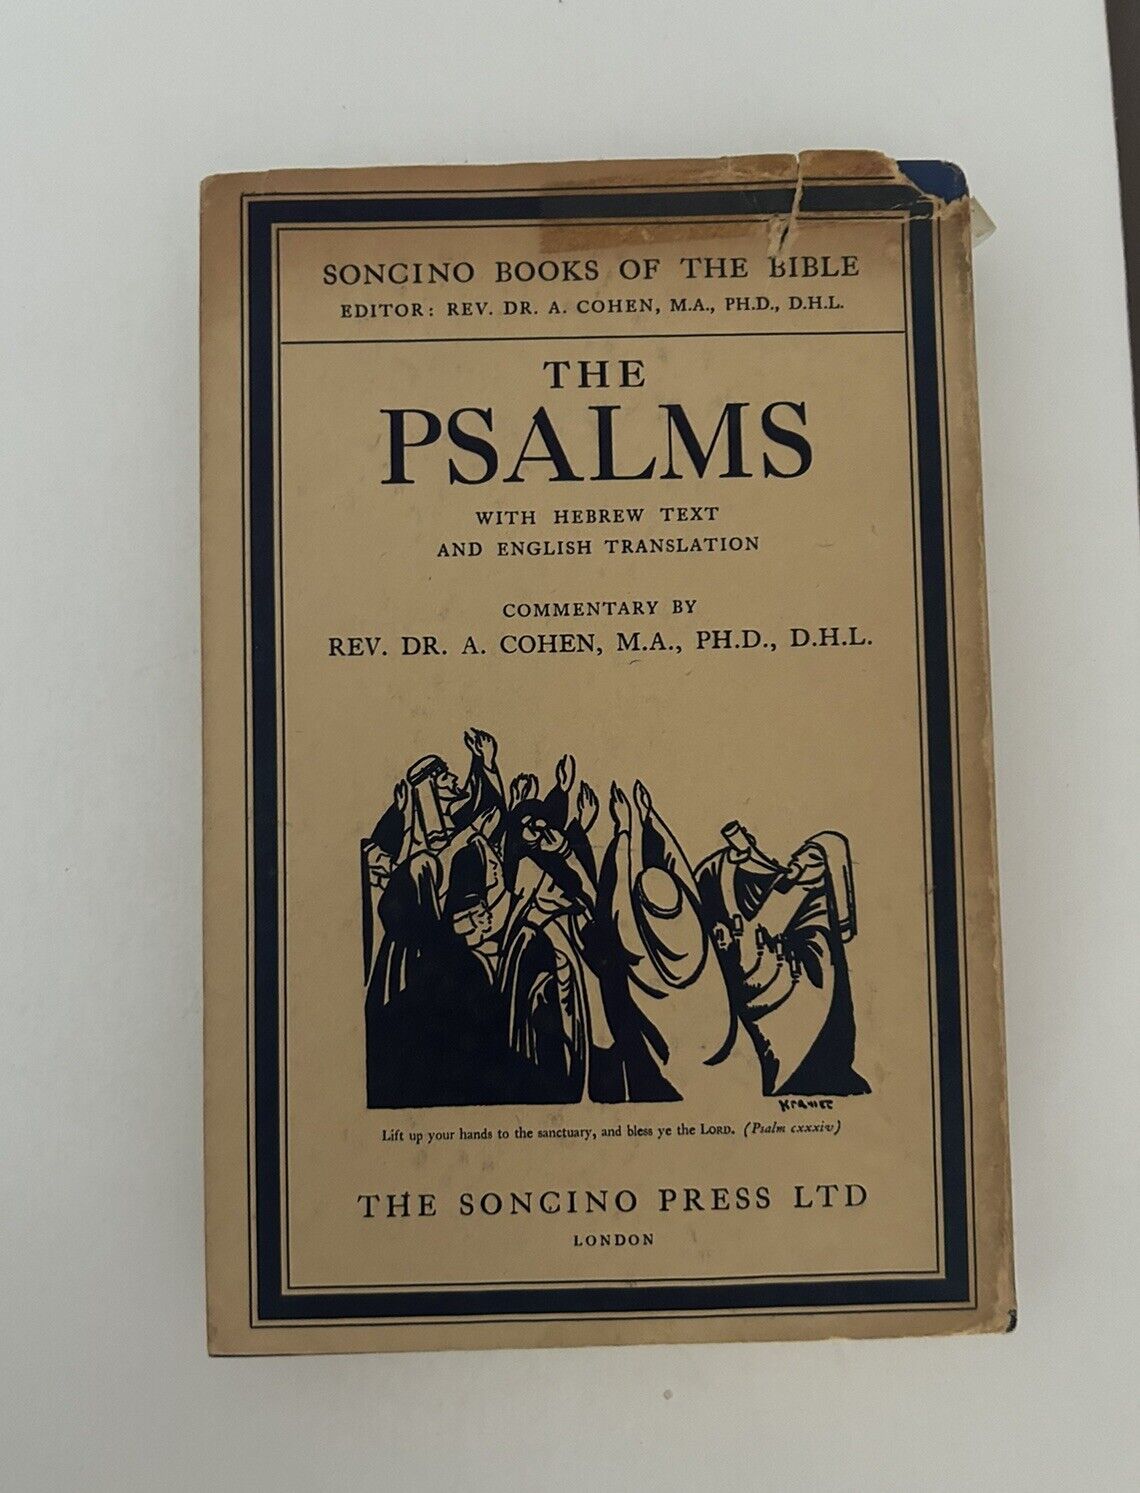 Psalms. Hebrew/English. Soncino Books of the Bible, 1960